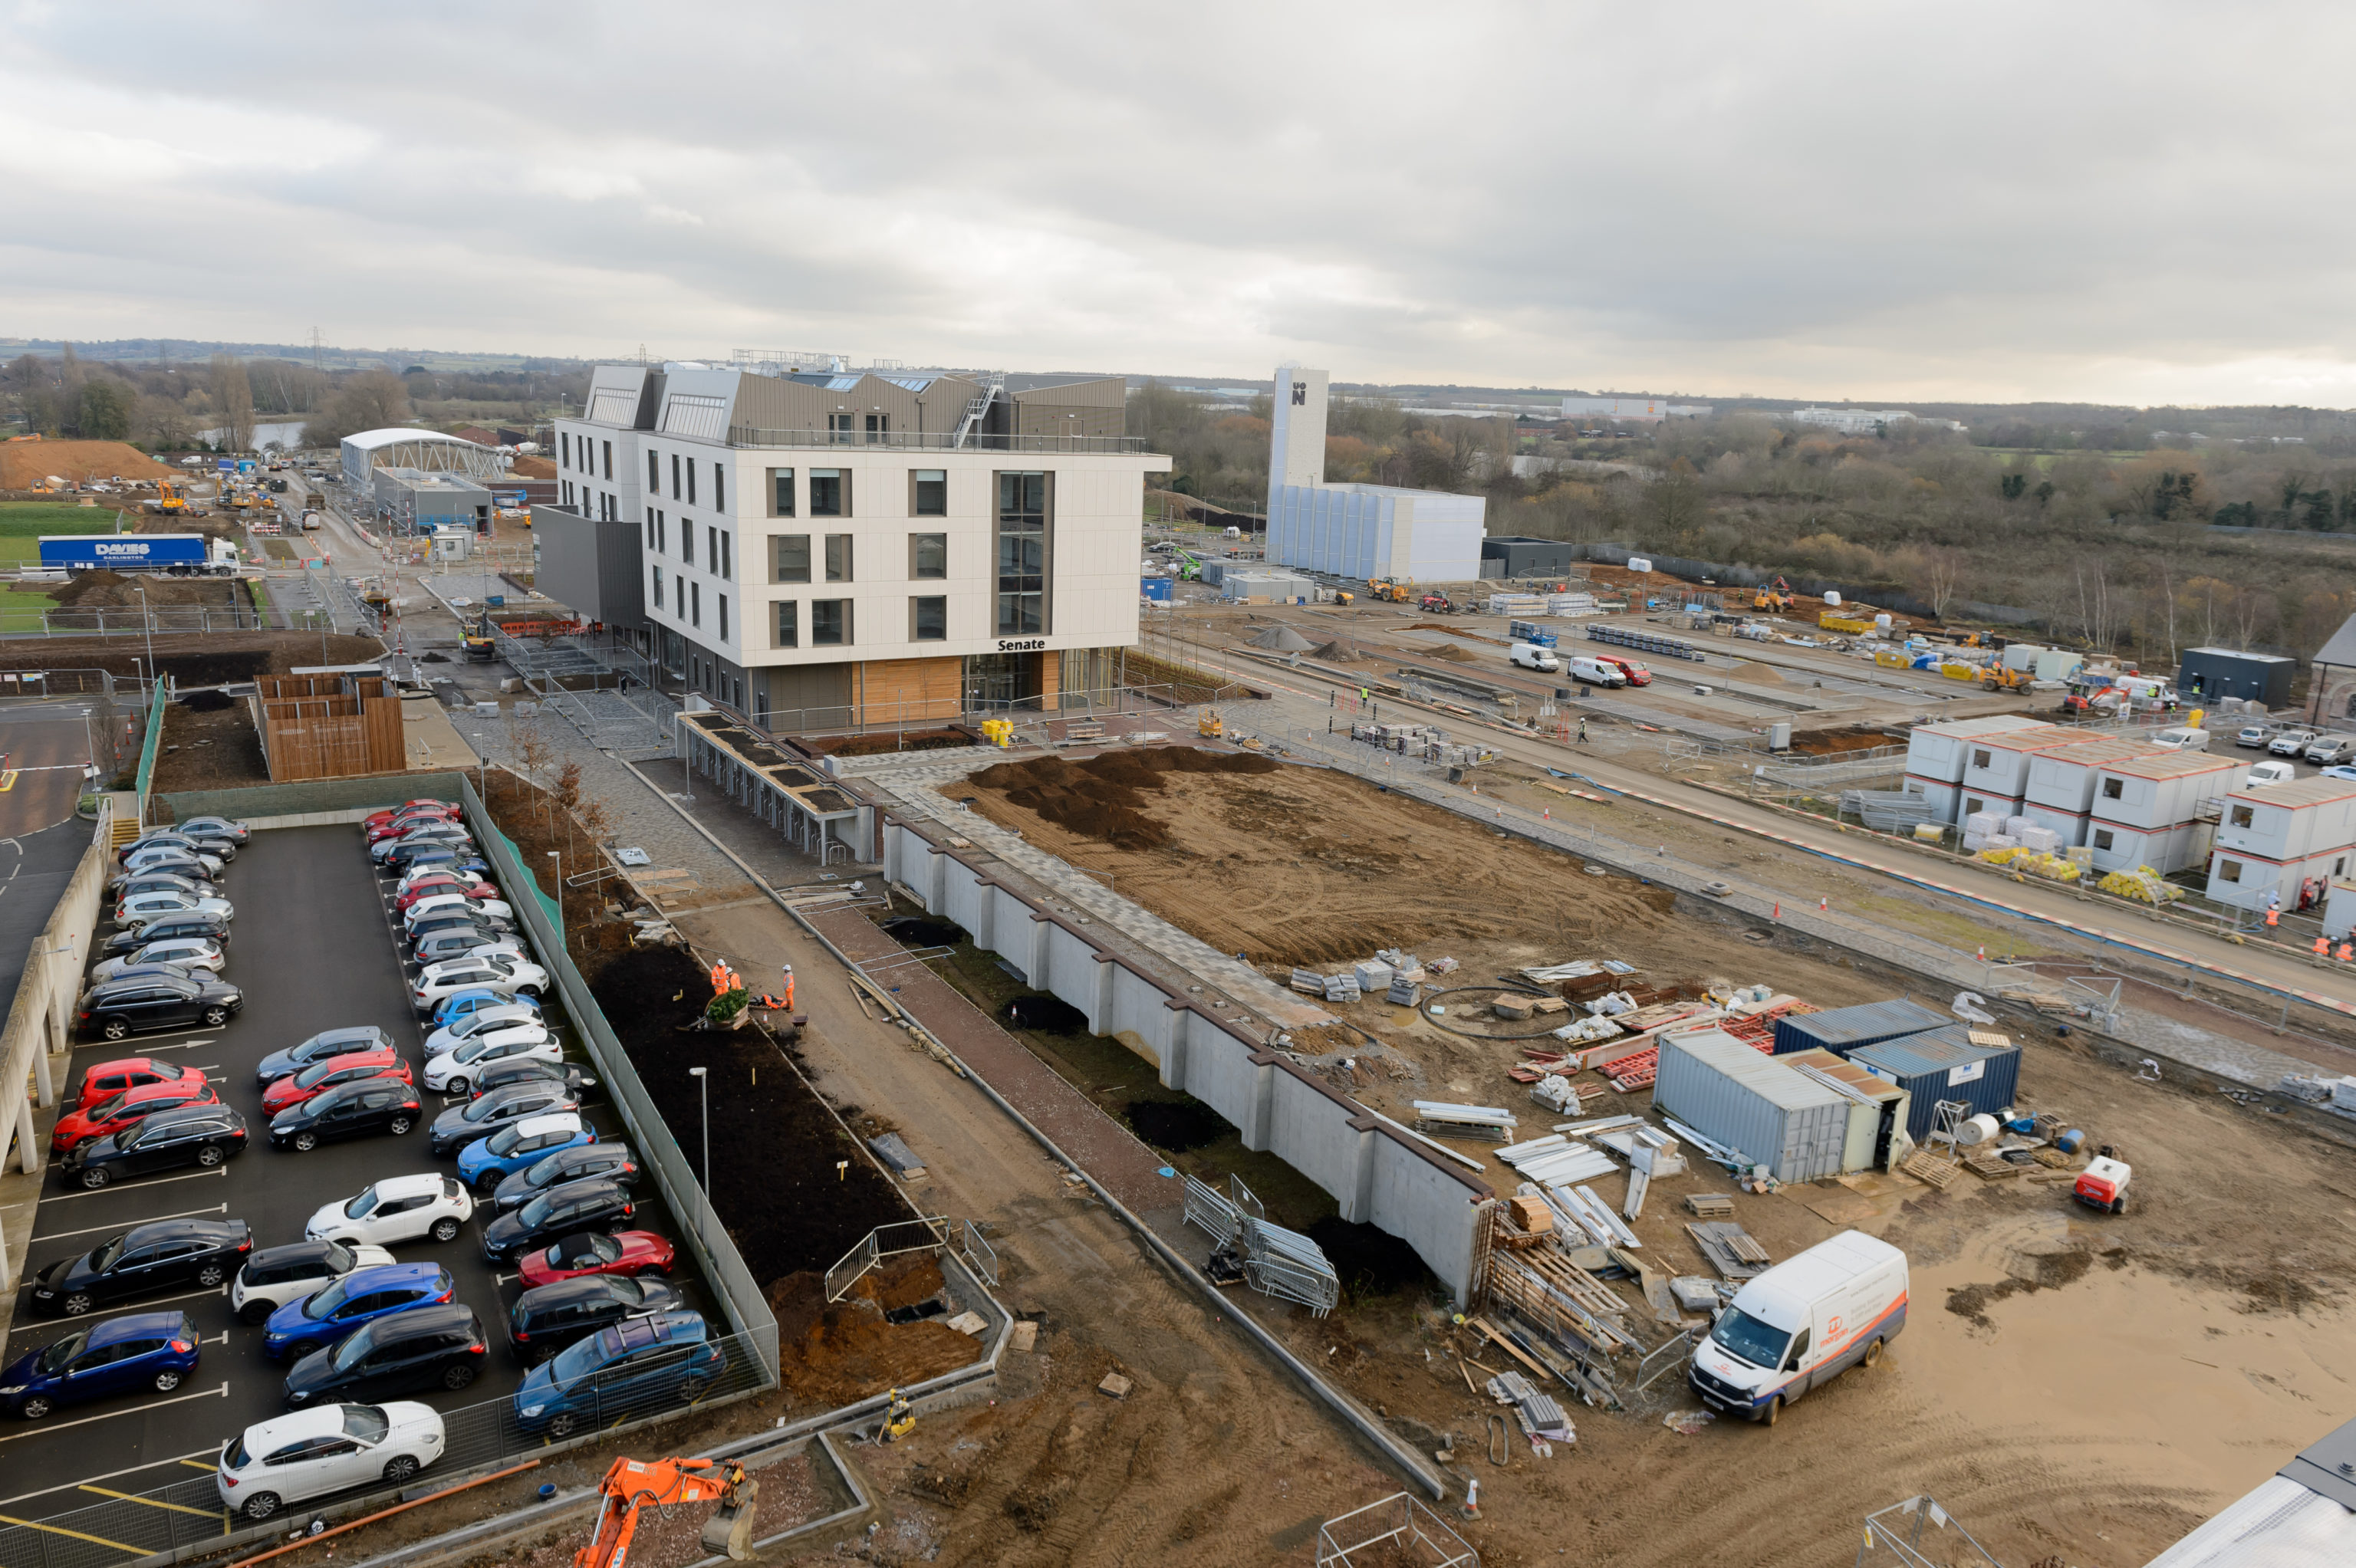 Well done to the McDermotts team for coming top of Bowmer & Kirkland's subcontractor leader board at the University of Northampton's new Waterside Campus.